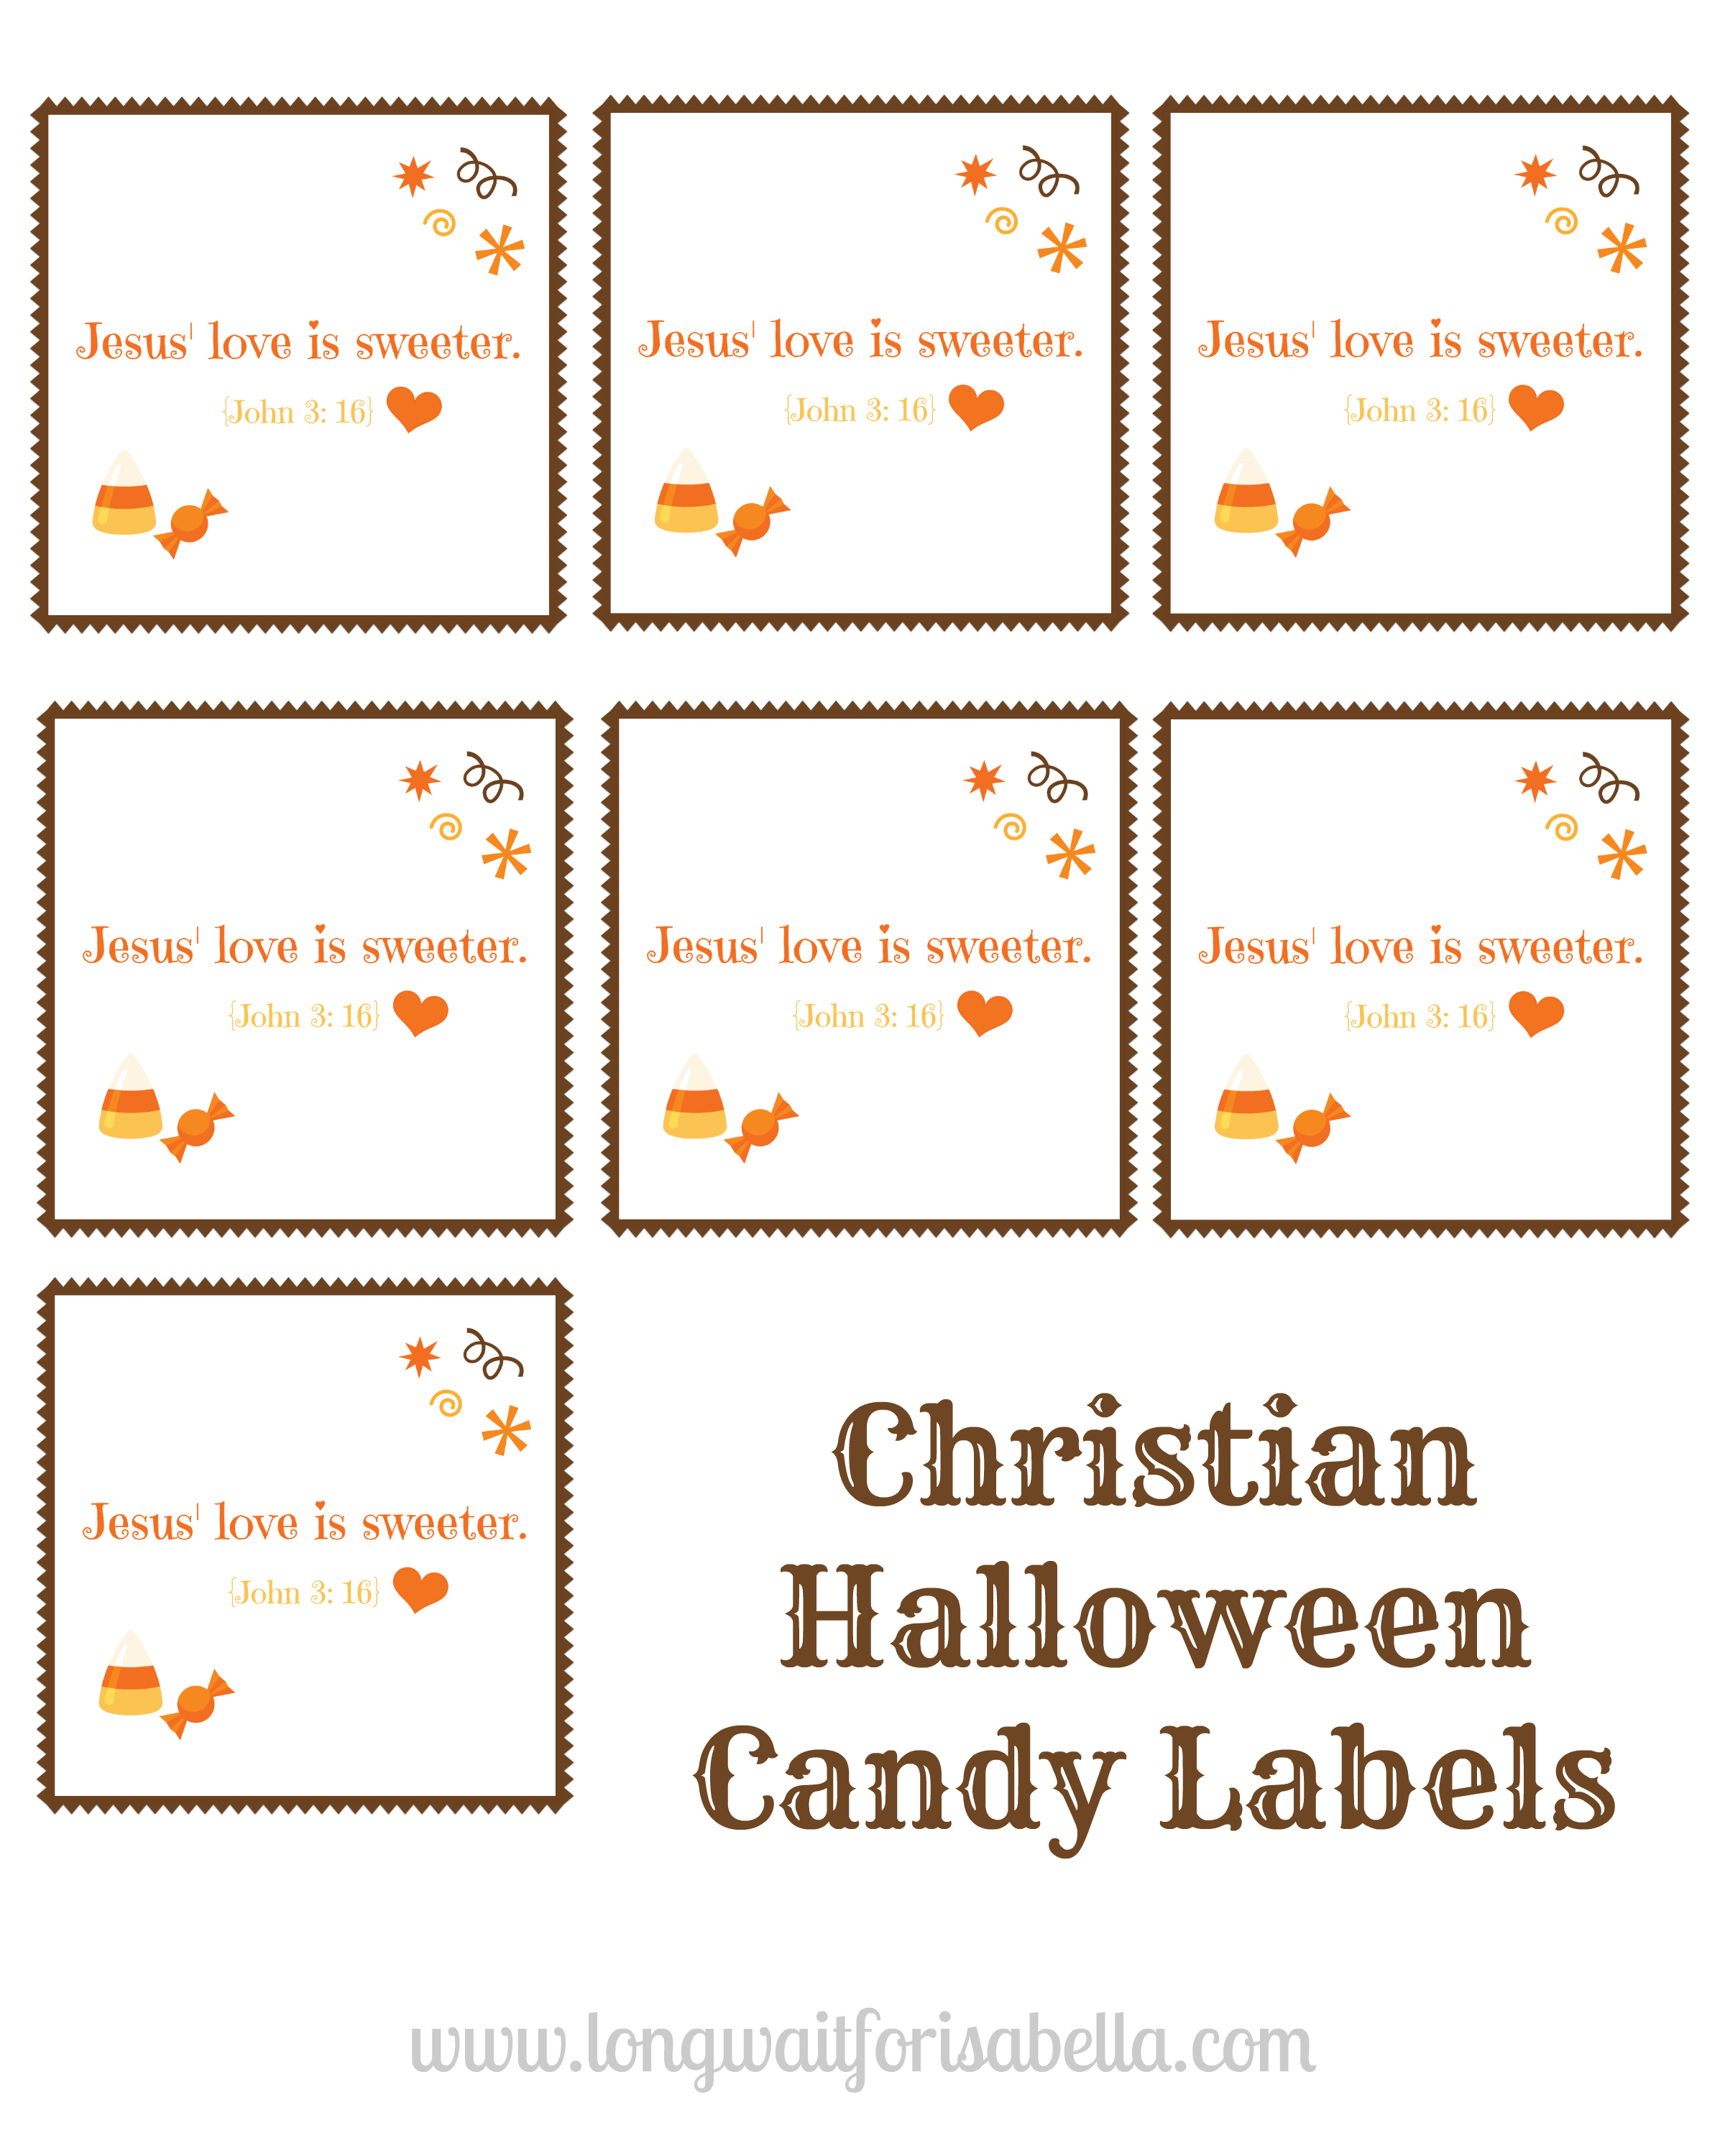 Print Out These Free Christian Halloween Candy Labels